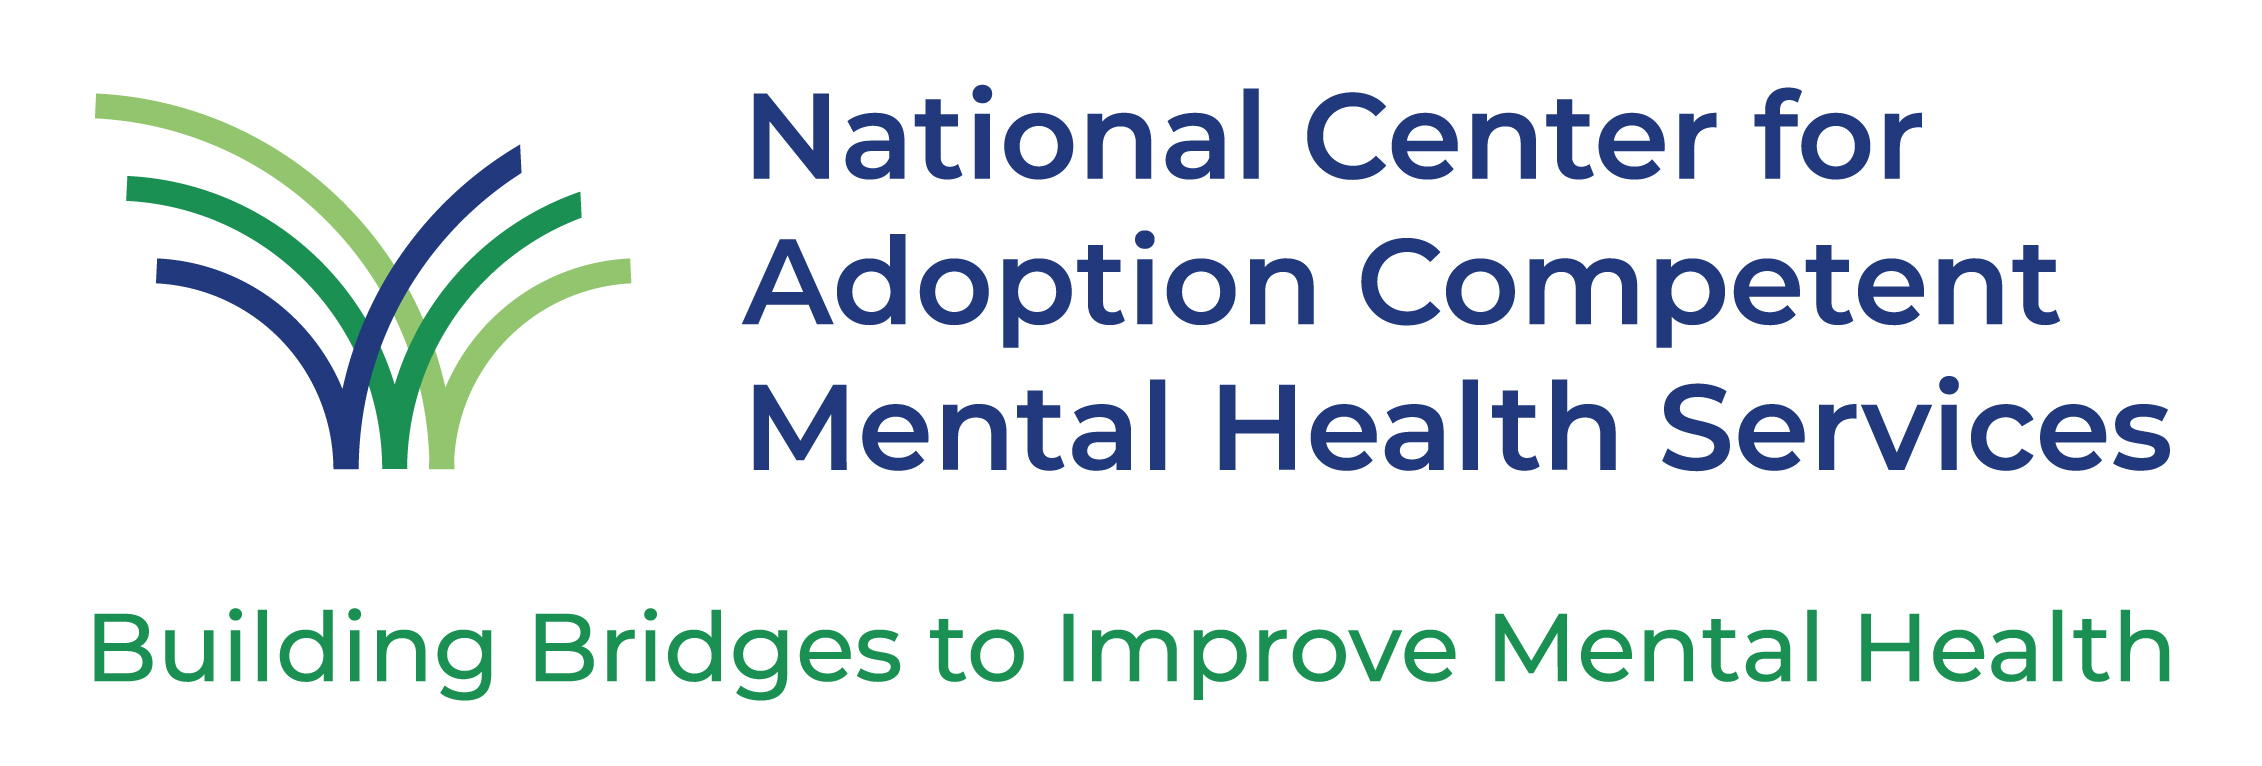 National Center for Adoption Competent Mental Health Services